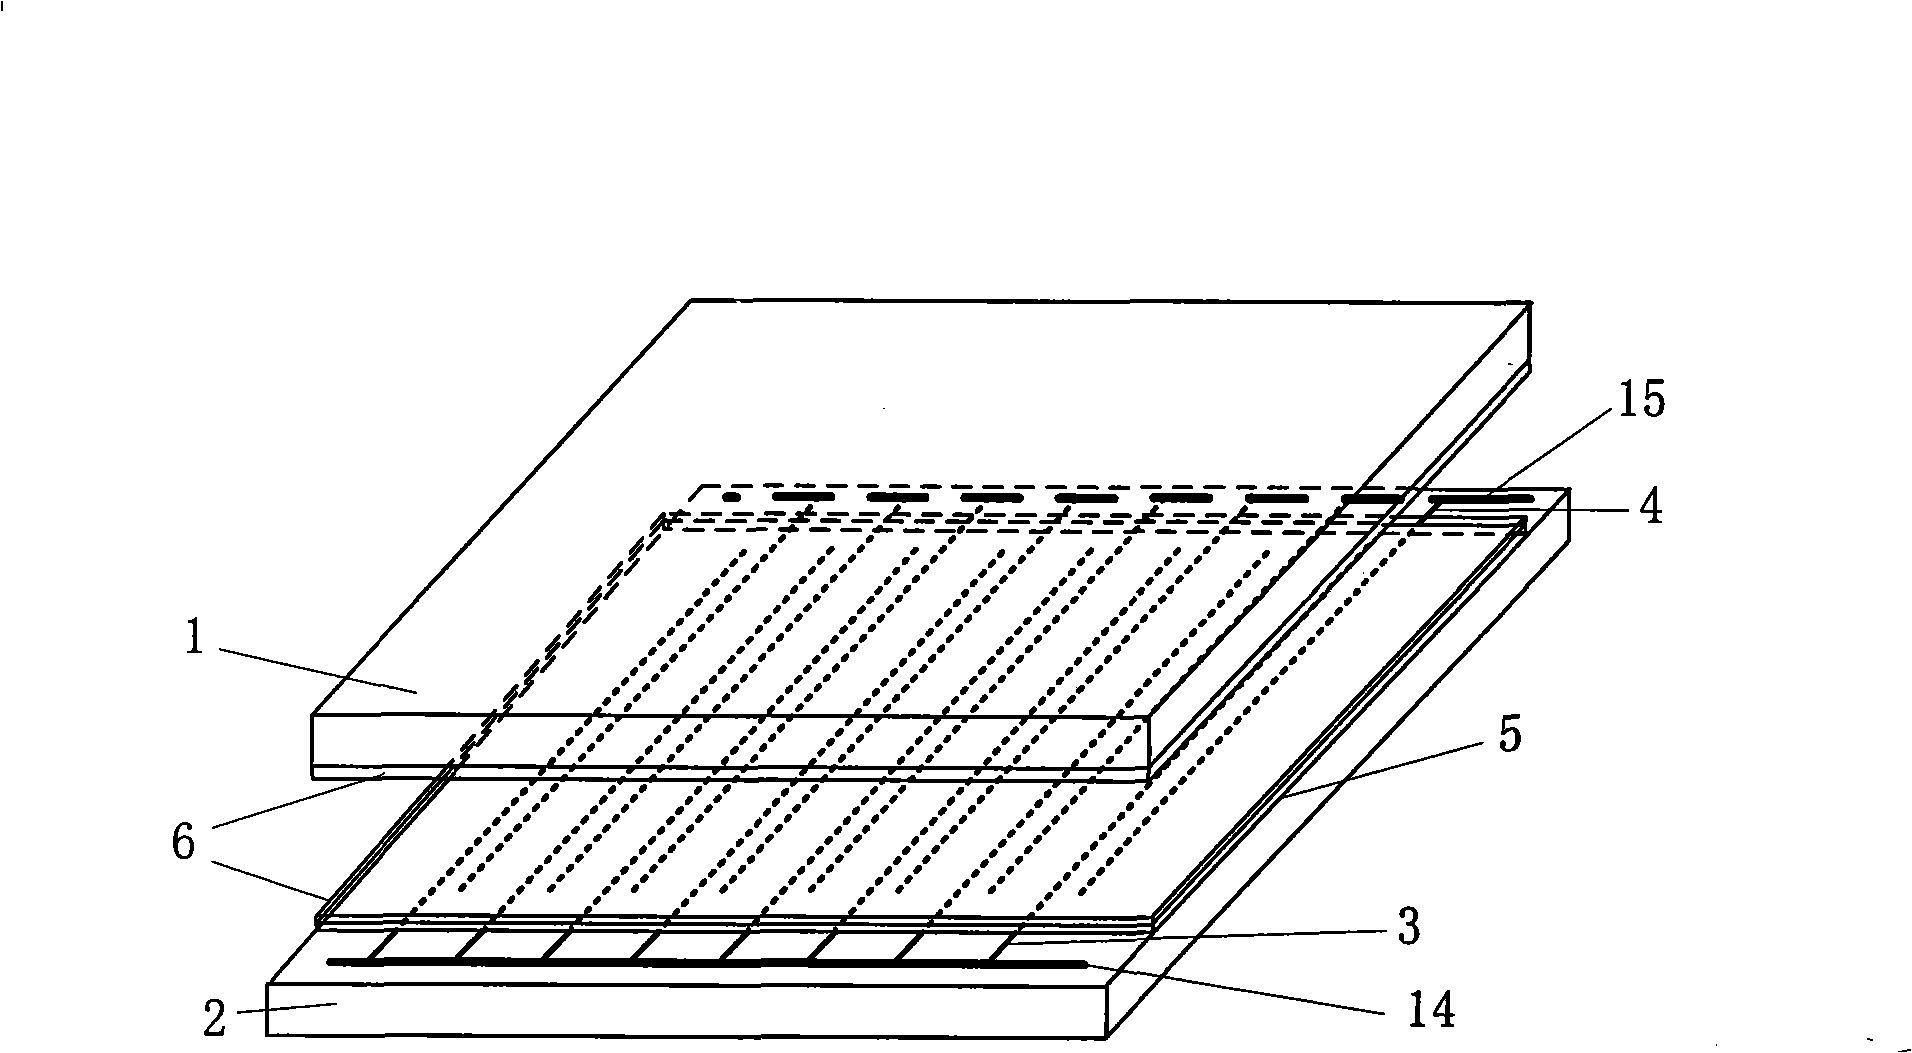 Production method of cold cathode flat light source